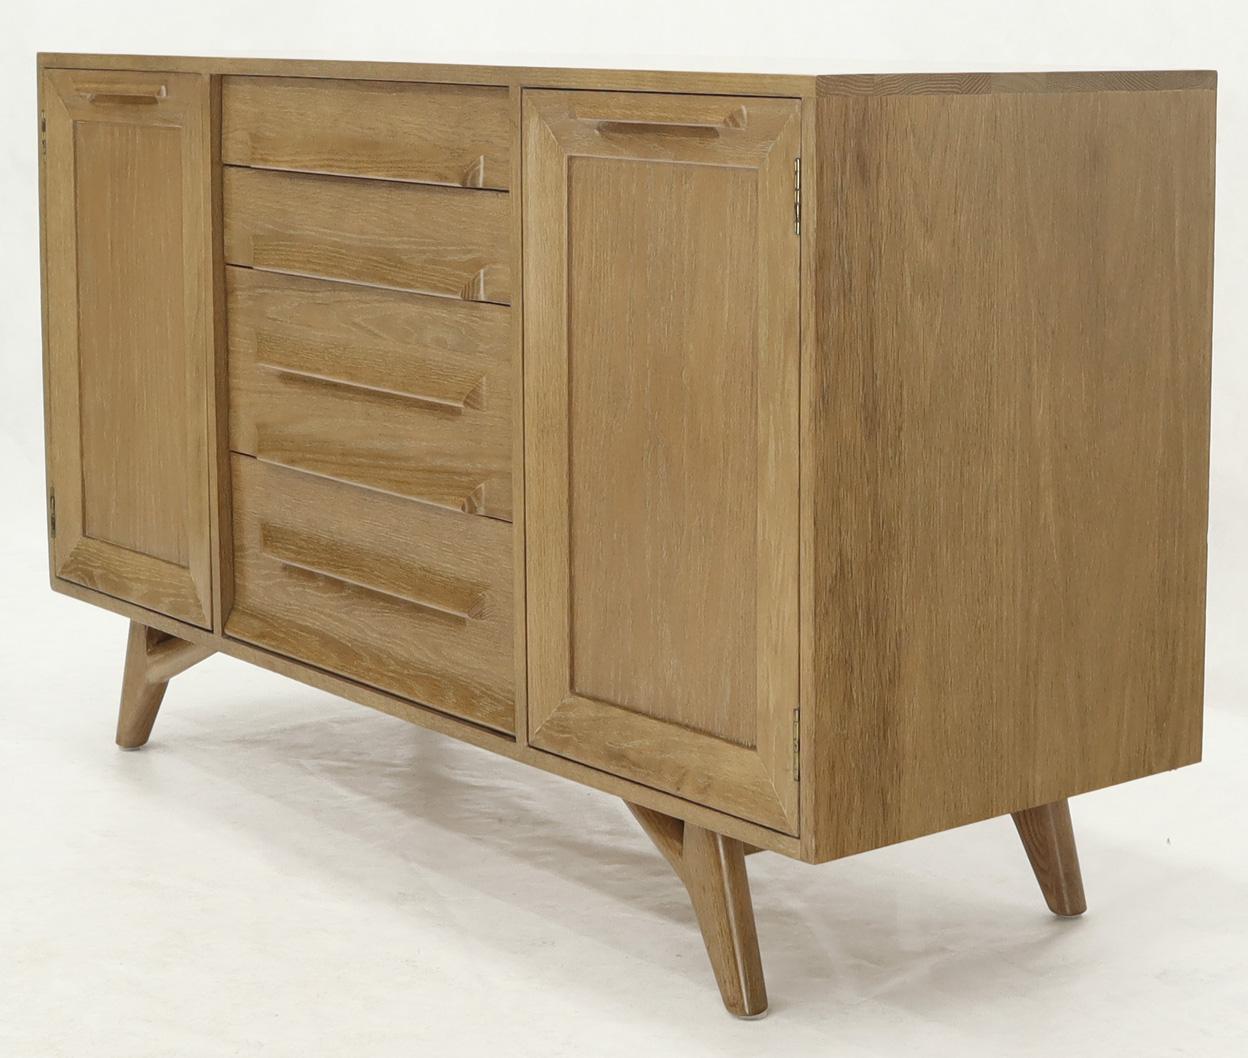 Mid-Century Modern cerused or limed oak finish solid board server sideboard cabinet. Organic shape legs. In style of or attributed to Brown and Saltman. The pair is rock solid made out of solid oak bard. Priced individually.